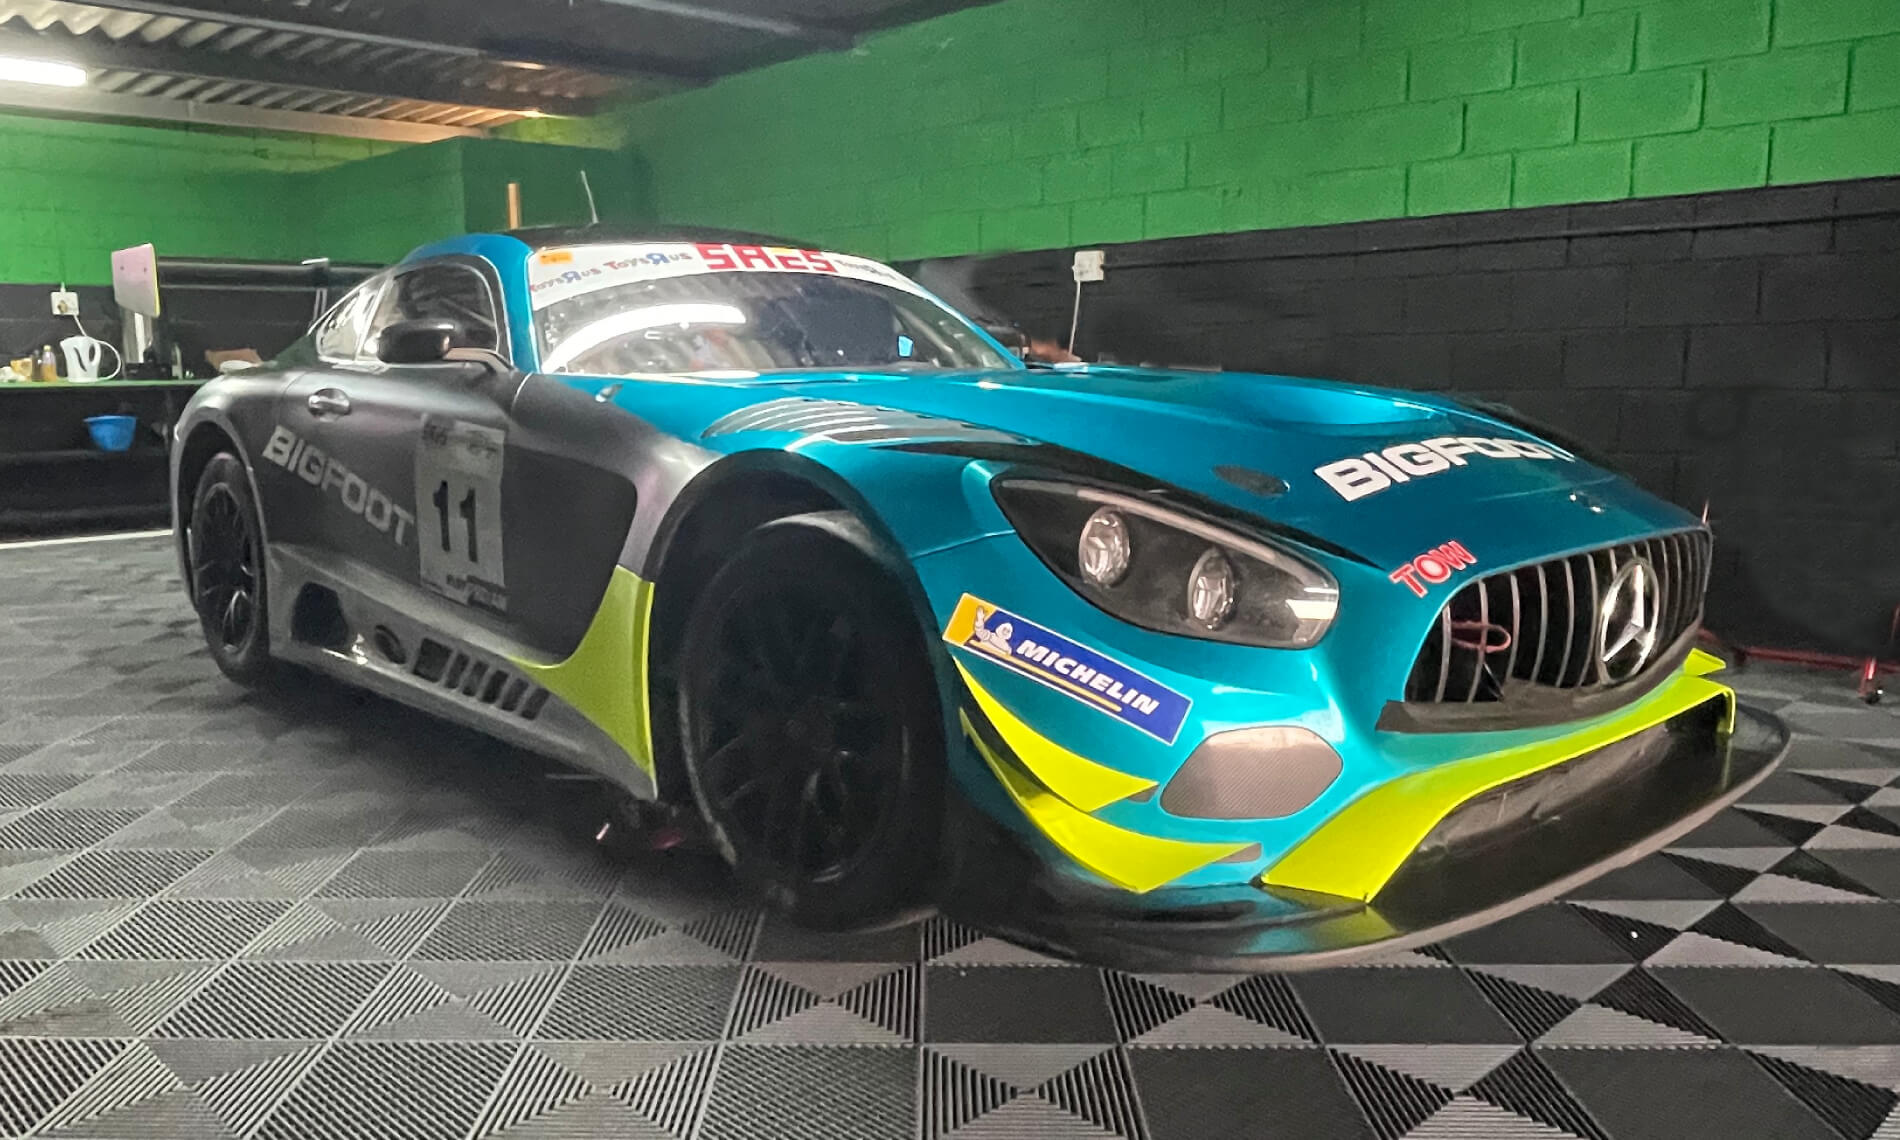 Africa’s First Mercedes-AMG GT3